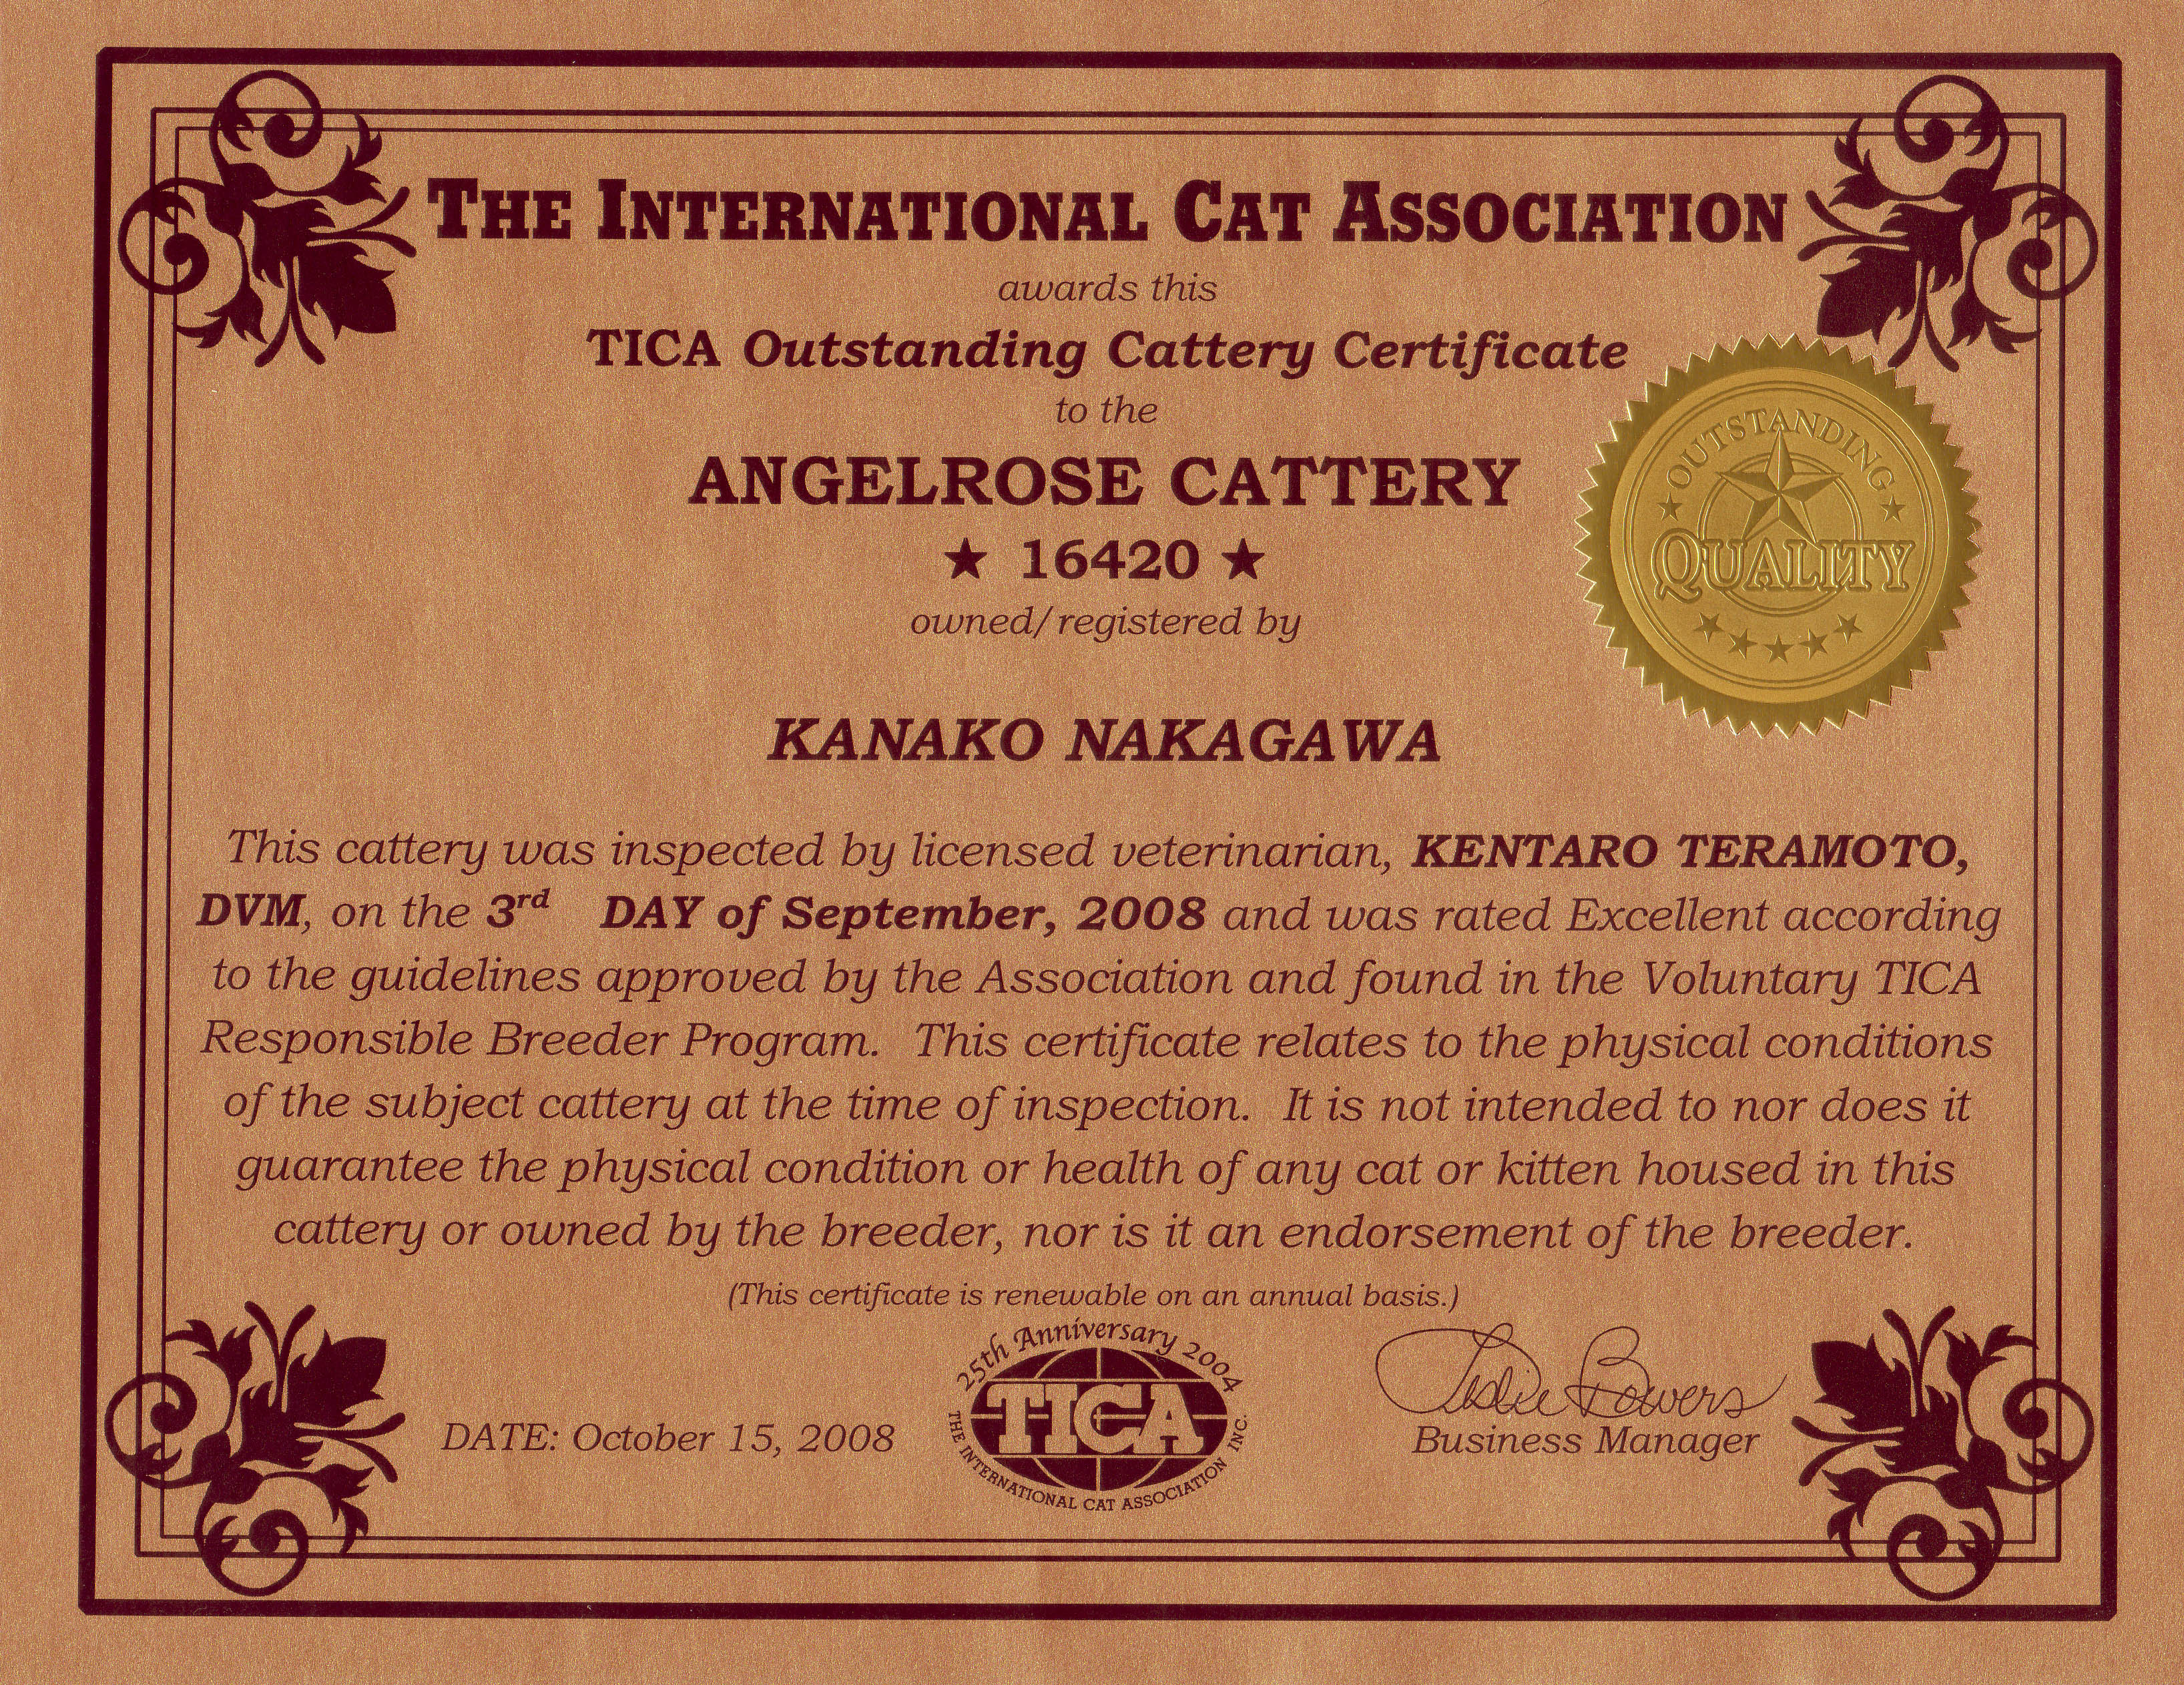 TICA Outstanding Cattery Certificate